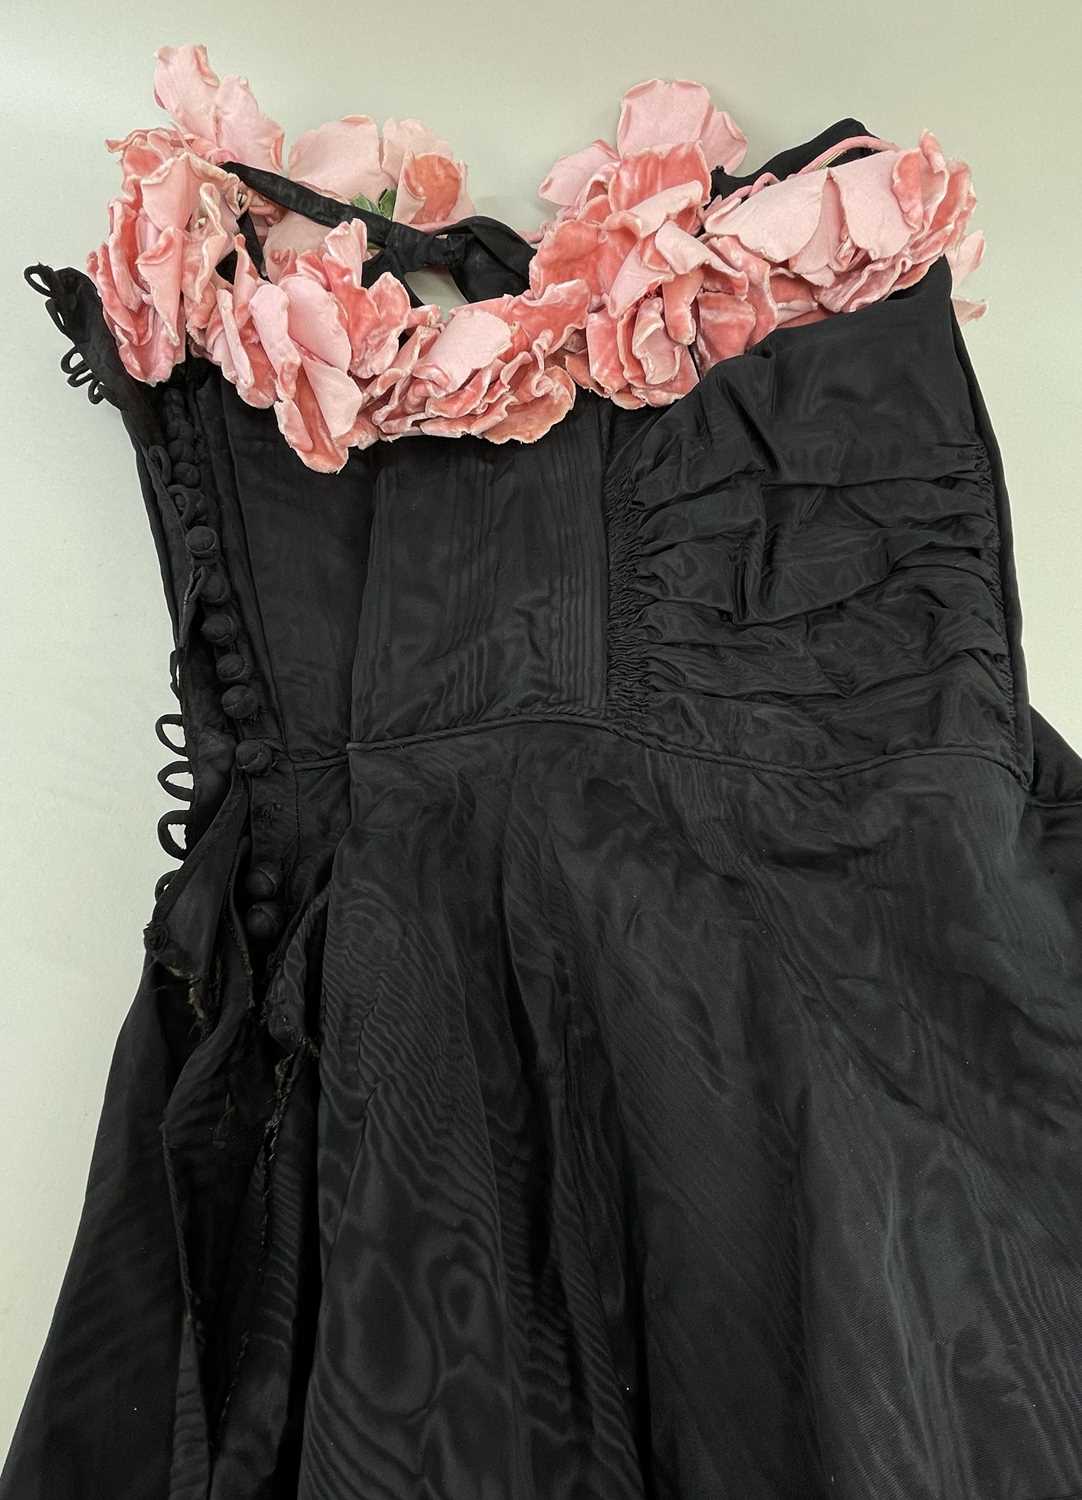 VICTORIAN BLACK BODICE, SATIN DRESS, & JAPANESE-STYLE CREPE 'KIMONO' GOWNS, the dress with watersilk - Image 7 of 23